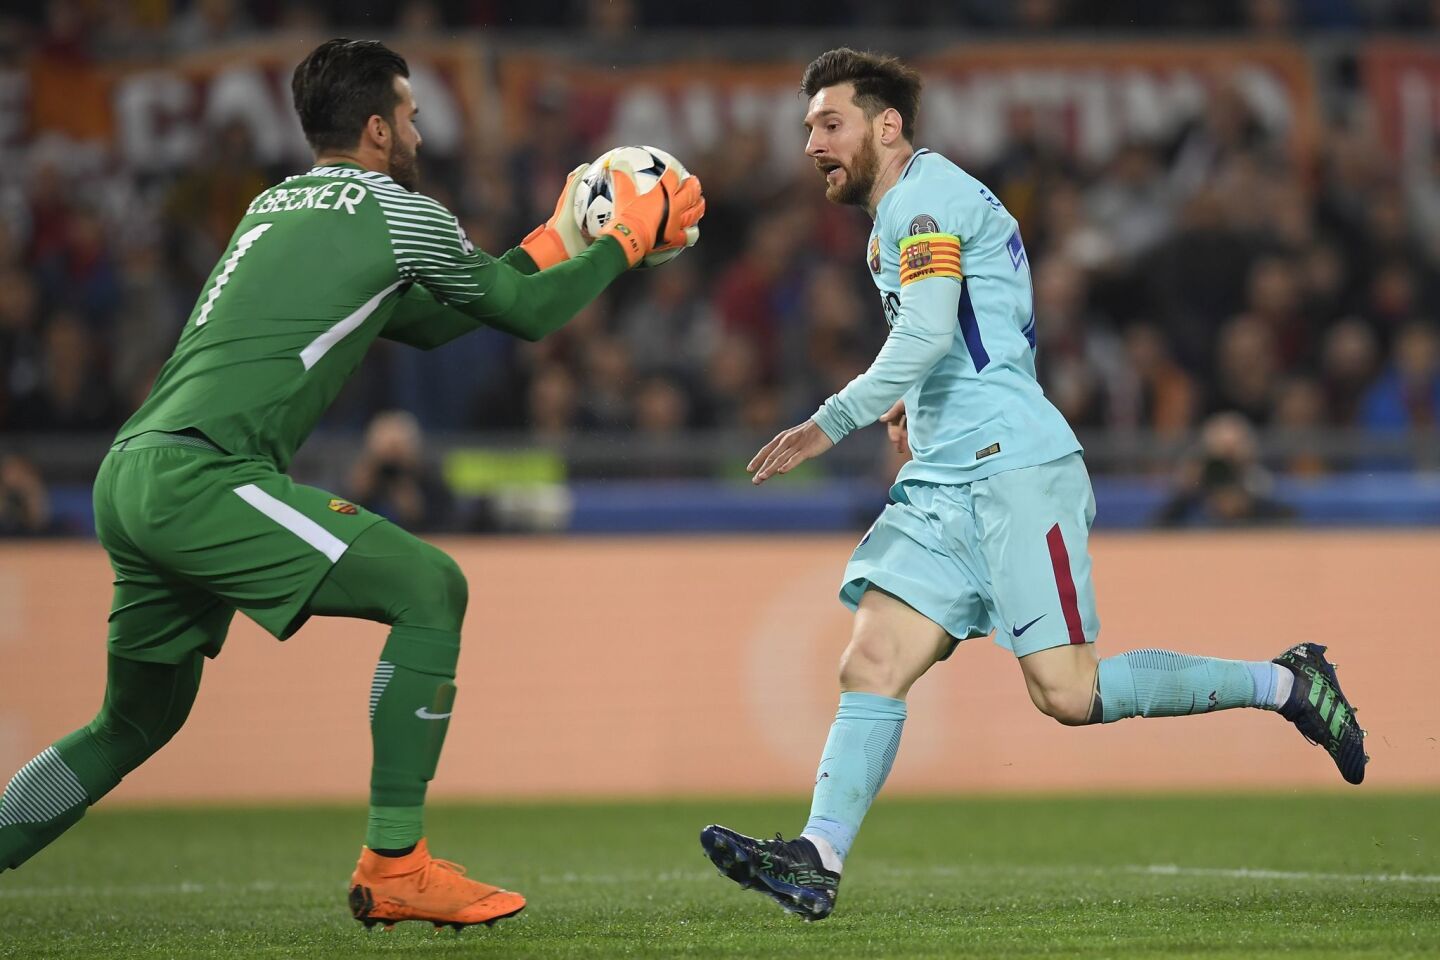 AS Roma's Brazilian goalkeeper Alisson Becker (L) catches the ball in front of FC Barcelona's Argentinian forward Lionel Messi (R) during the UEFA Champions League quarter-final second leg football match between AS Roma and FC Barcelona at the Olympic Stadium in Rome on April 10, 2018.